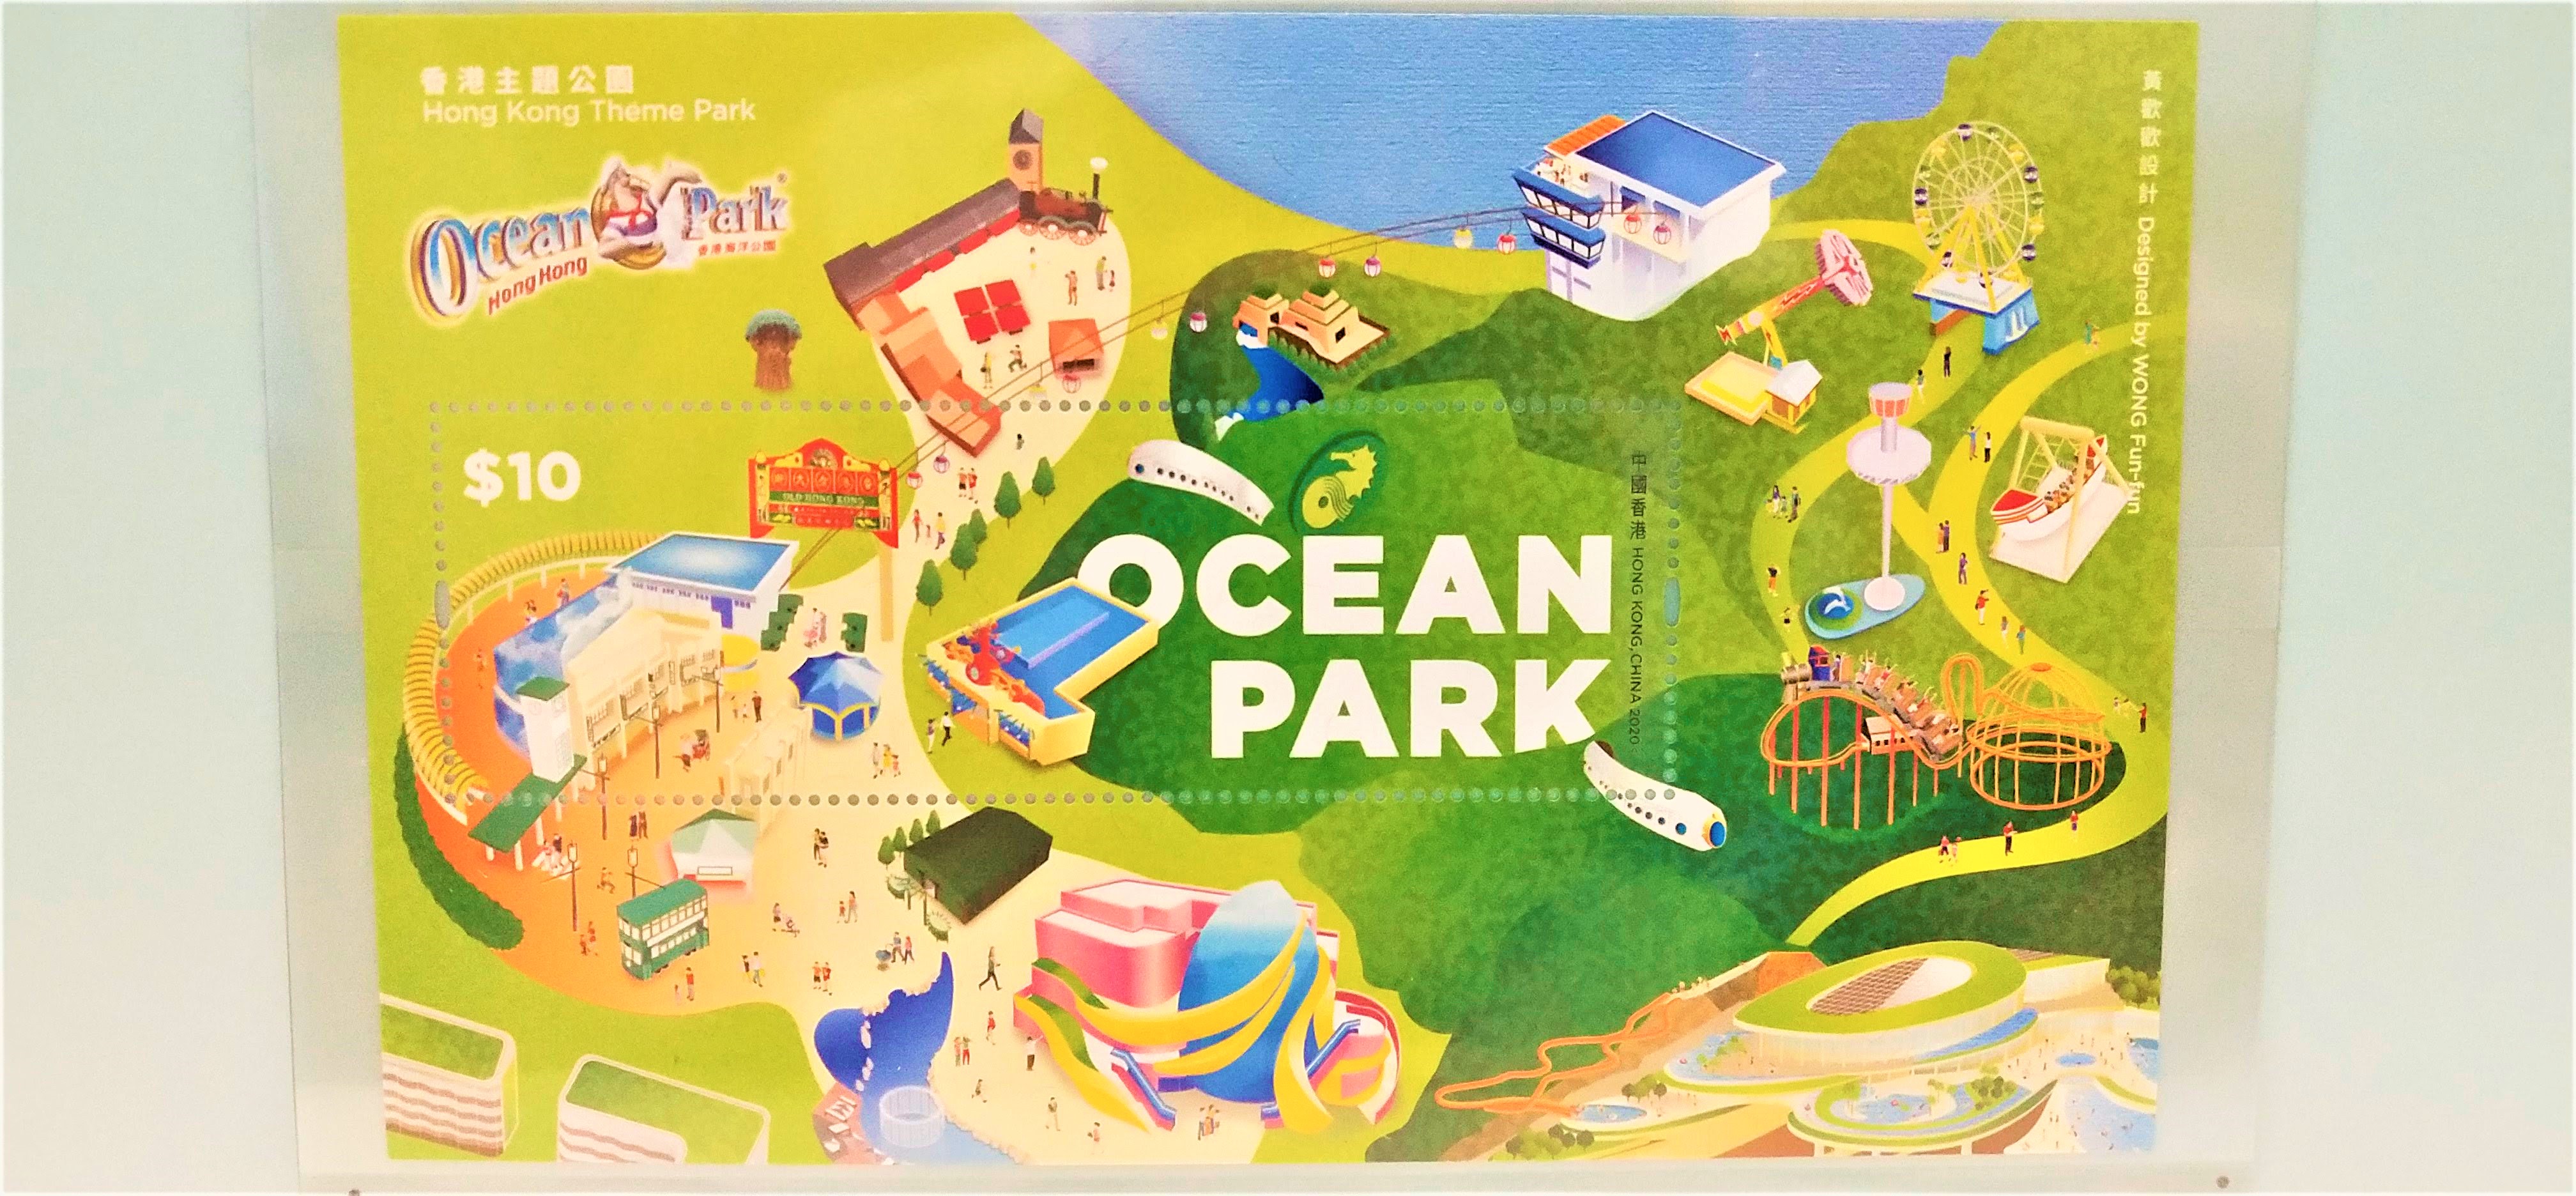 $10 Stamp Sheetlet shows you the colorful Ocean Park